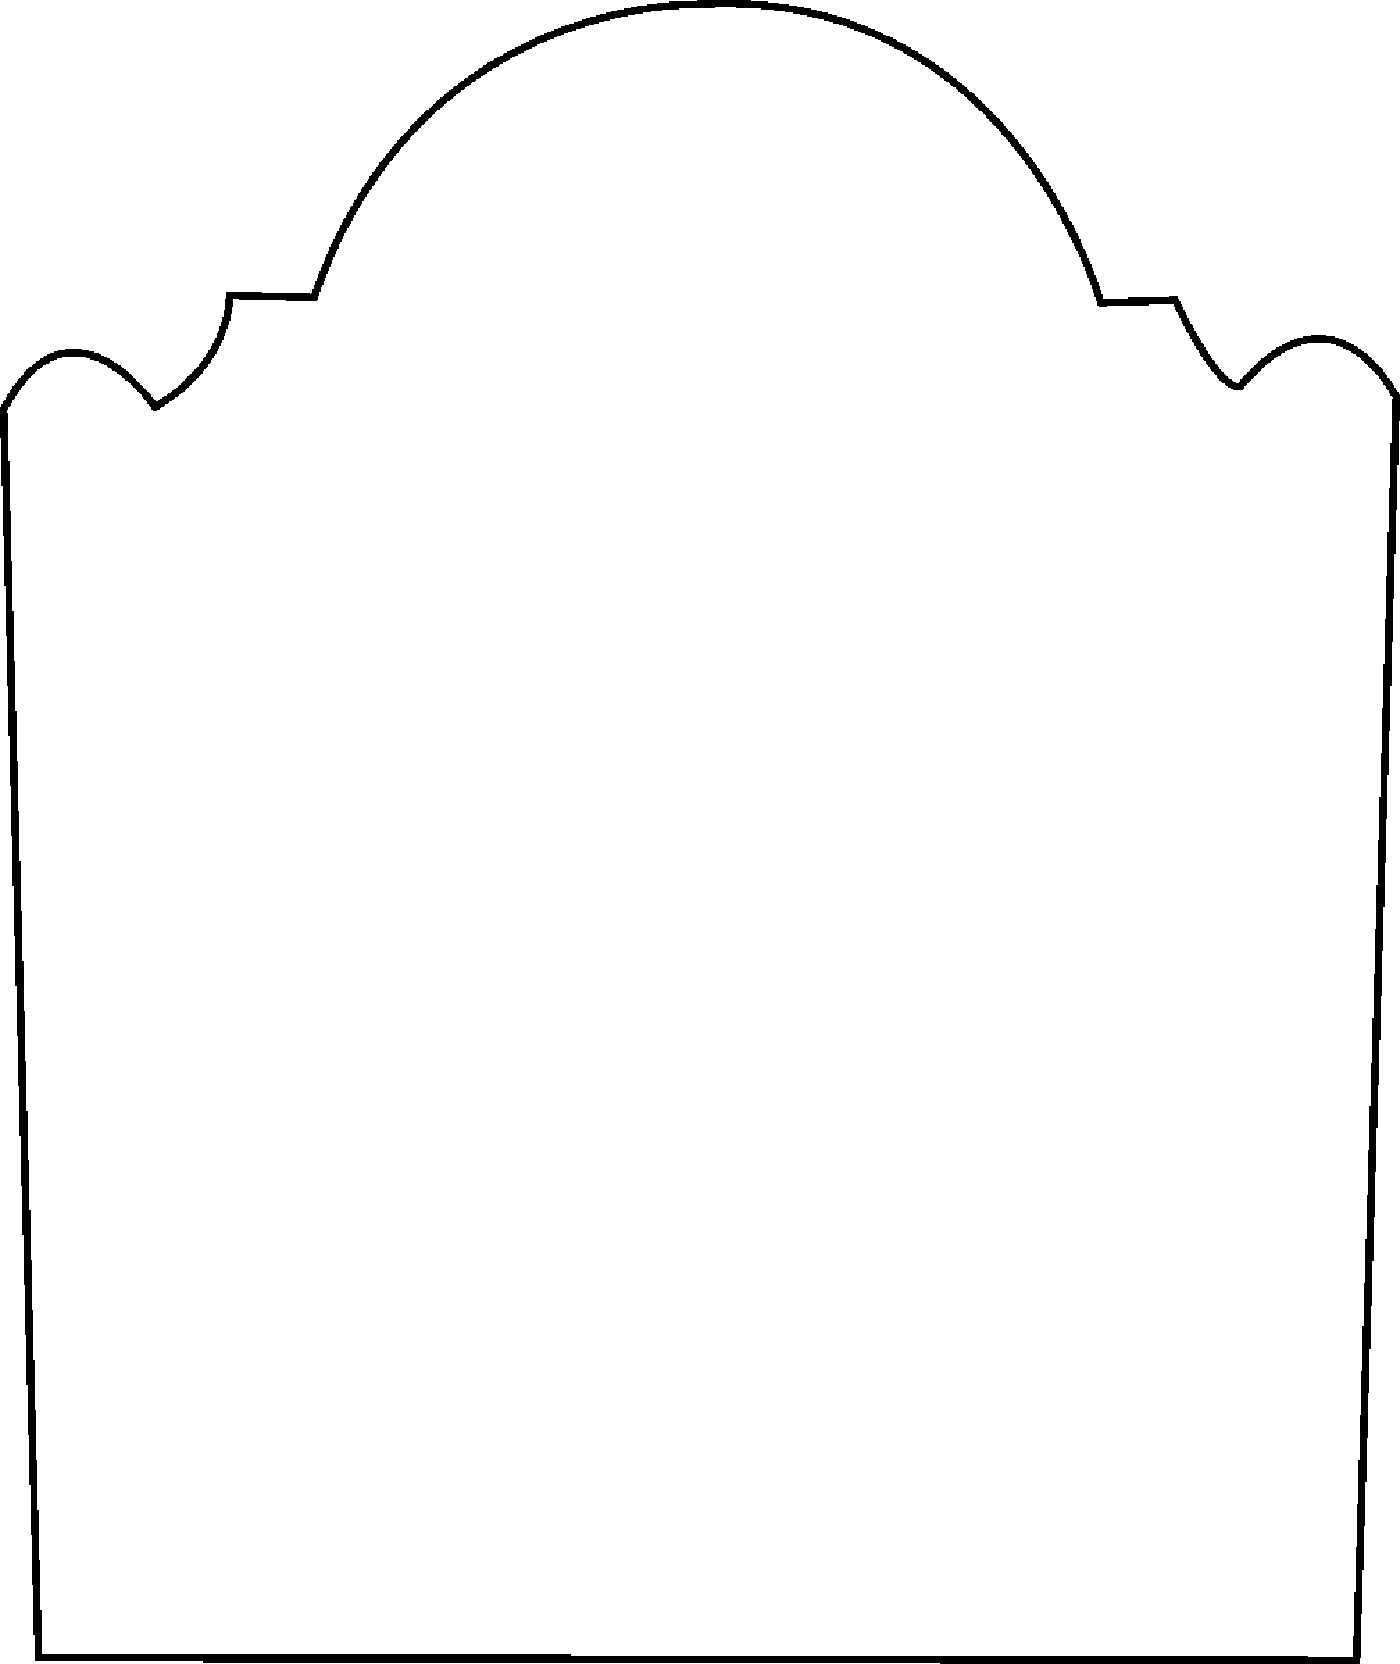 Blank tombstone Coloring Page Free Castle for Kids Download Free Clip Art Free Clip Art